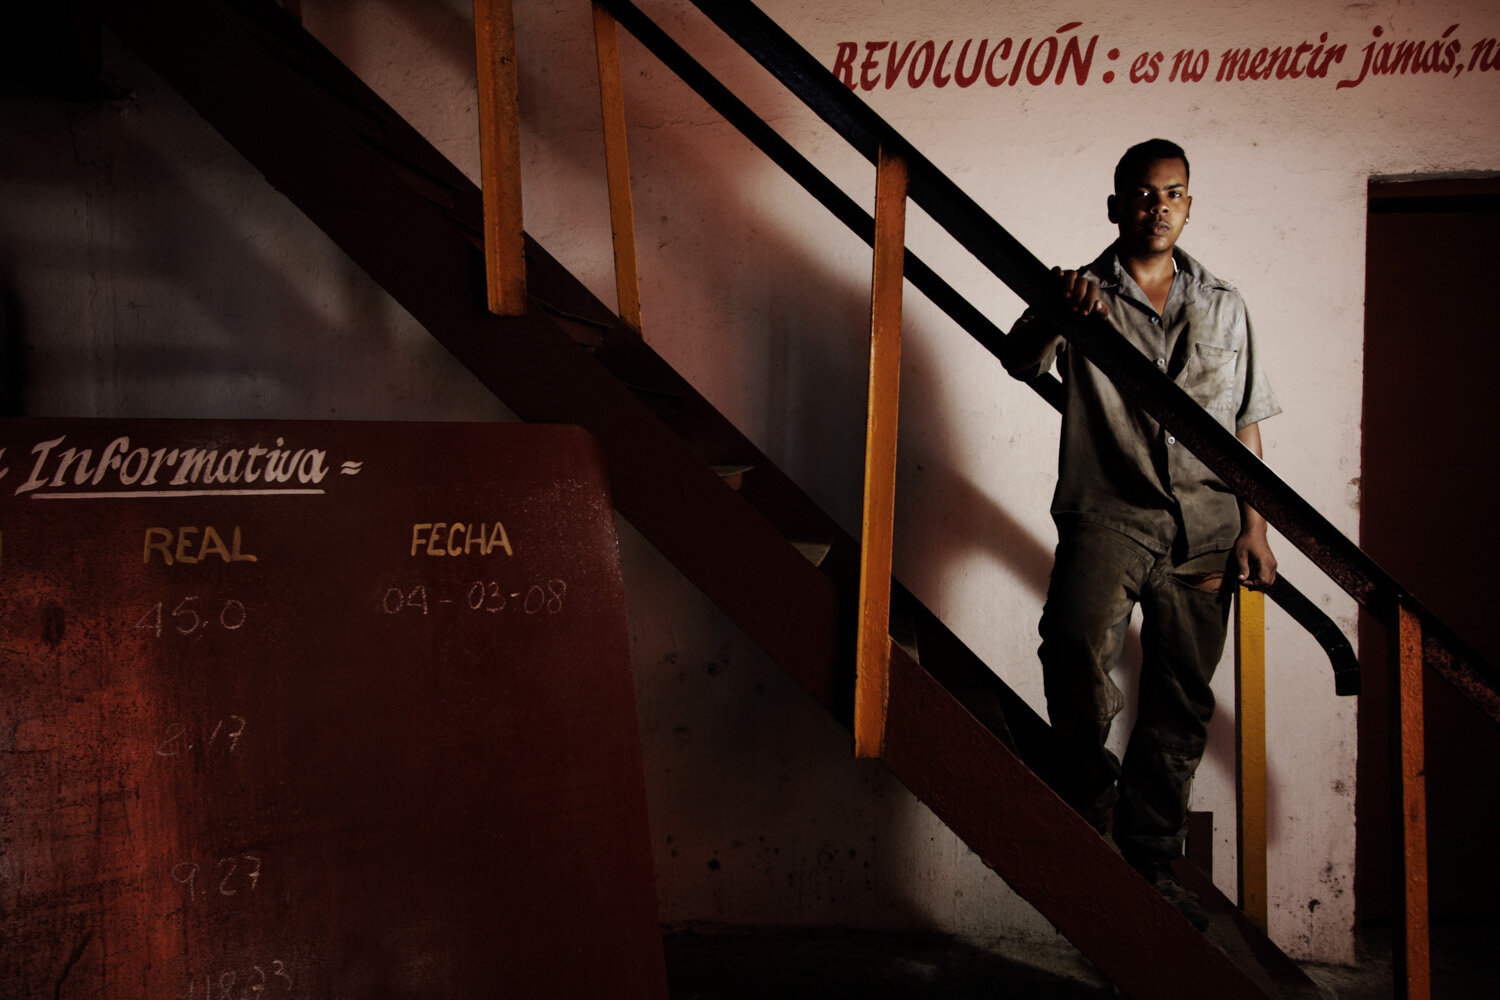  Lazaro,18, assistant electrician, stands on a stairway that bears a slogan by Fidel Castro: Revolution is never to lie!, in a sugarcane factory, where he started working one year ago. 